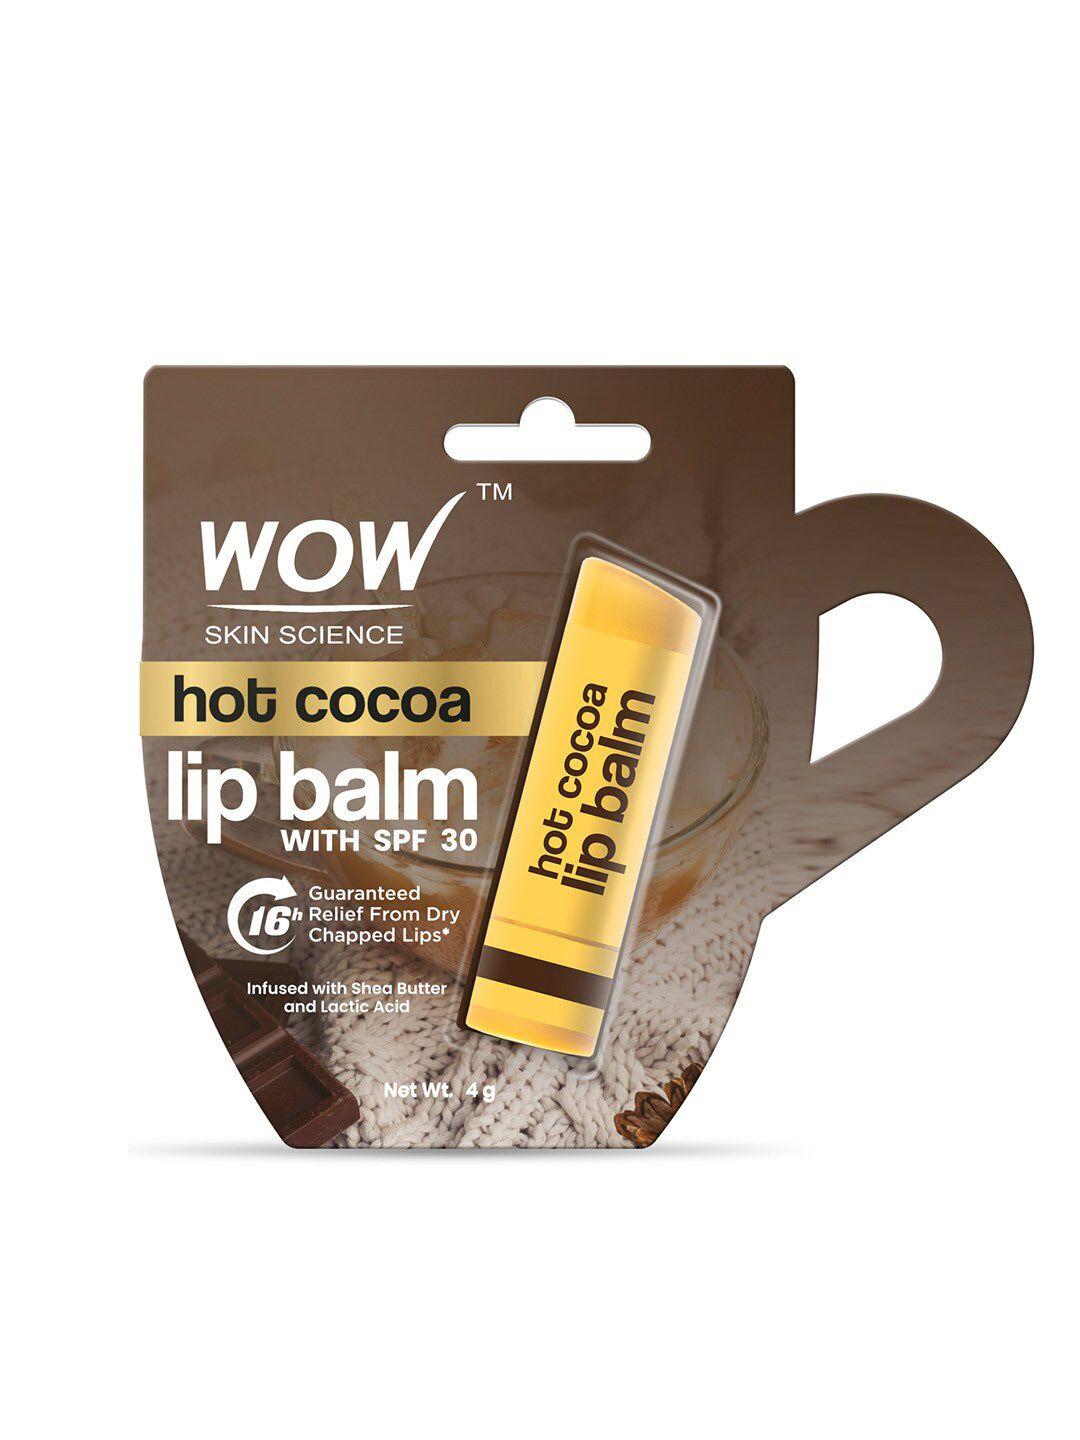 wow-skin-science-hot-cocoa-lip-balm-with-shea-butter-&-lactic-acid-4-g---brown